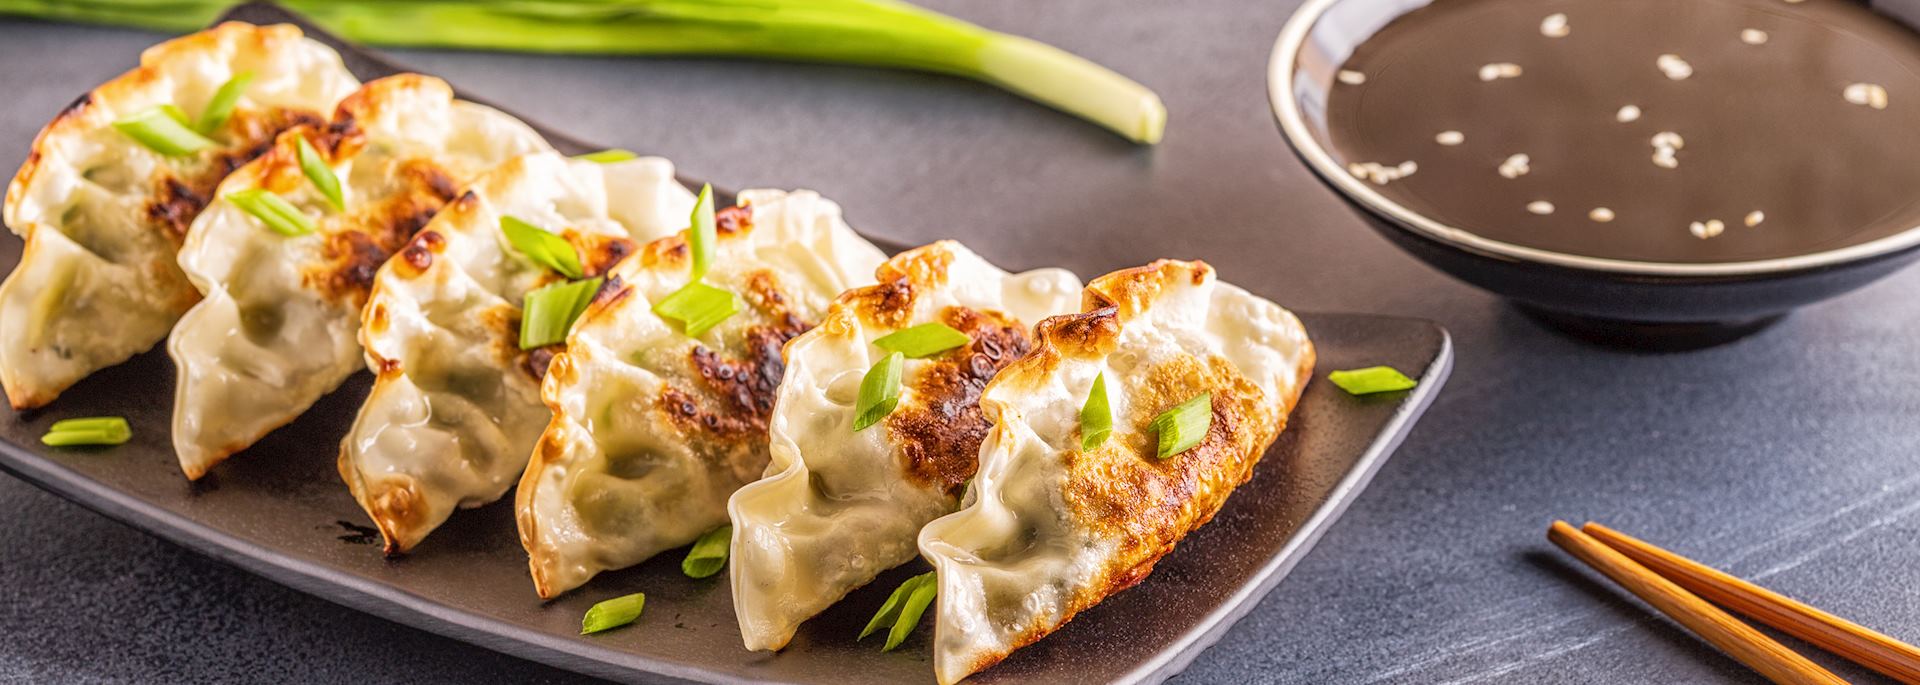 Gyoza (or dumplings) snack with soy sauce